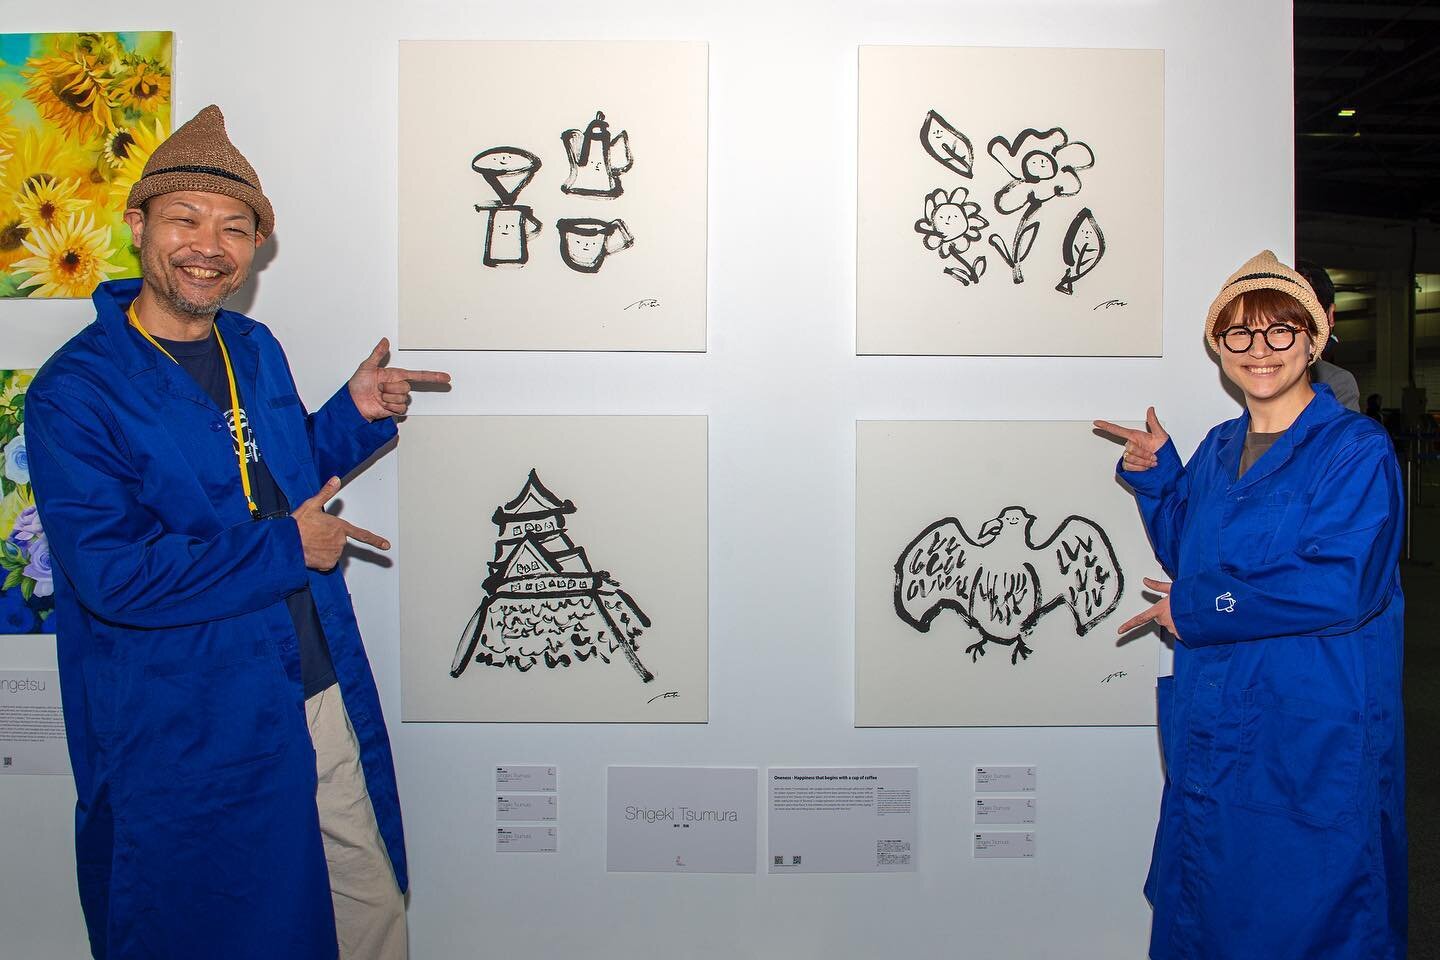 It&rsquo;s good to meet people who find oneness and happiness that begins with a cup of coffee, and who wear &ldquo;tongari&rdquo; hat and gardening coat.

Shigeki Tsumura with his work at @japantide @worldartdubai last month.